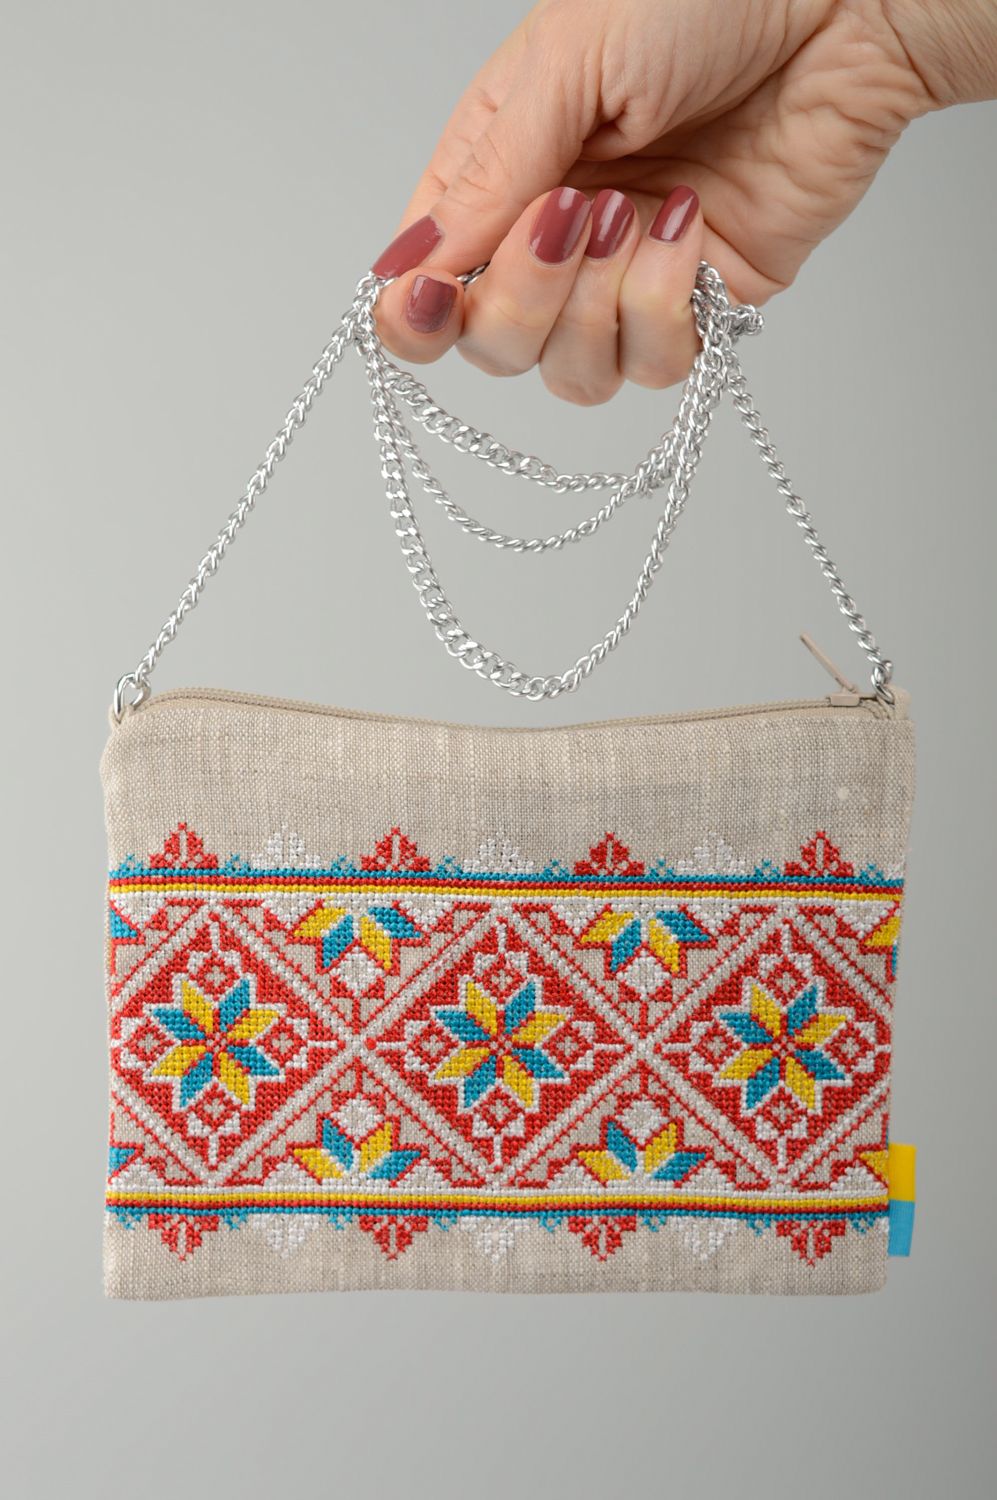 Ethnic cross stitch embroidered linen clutch bag photo 2